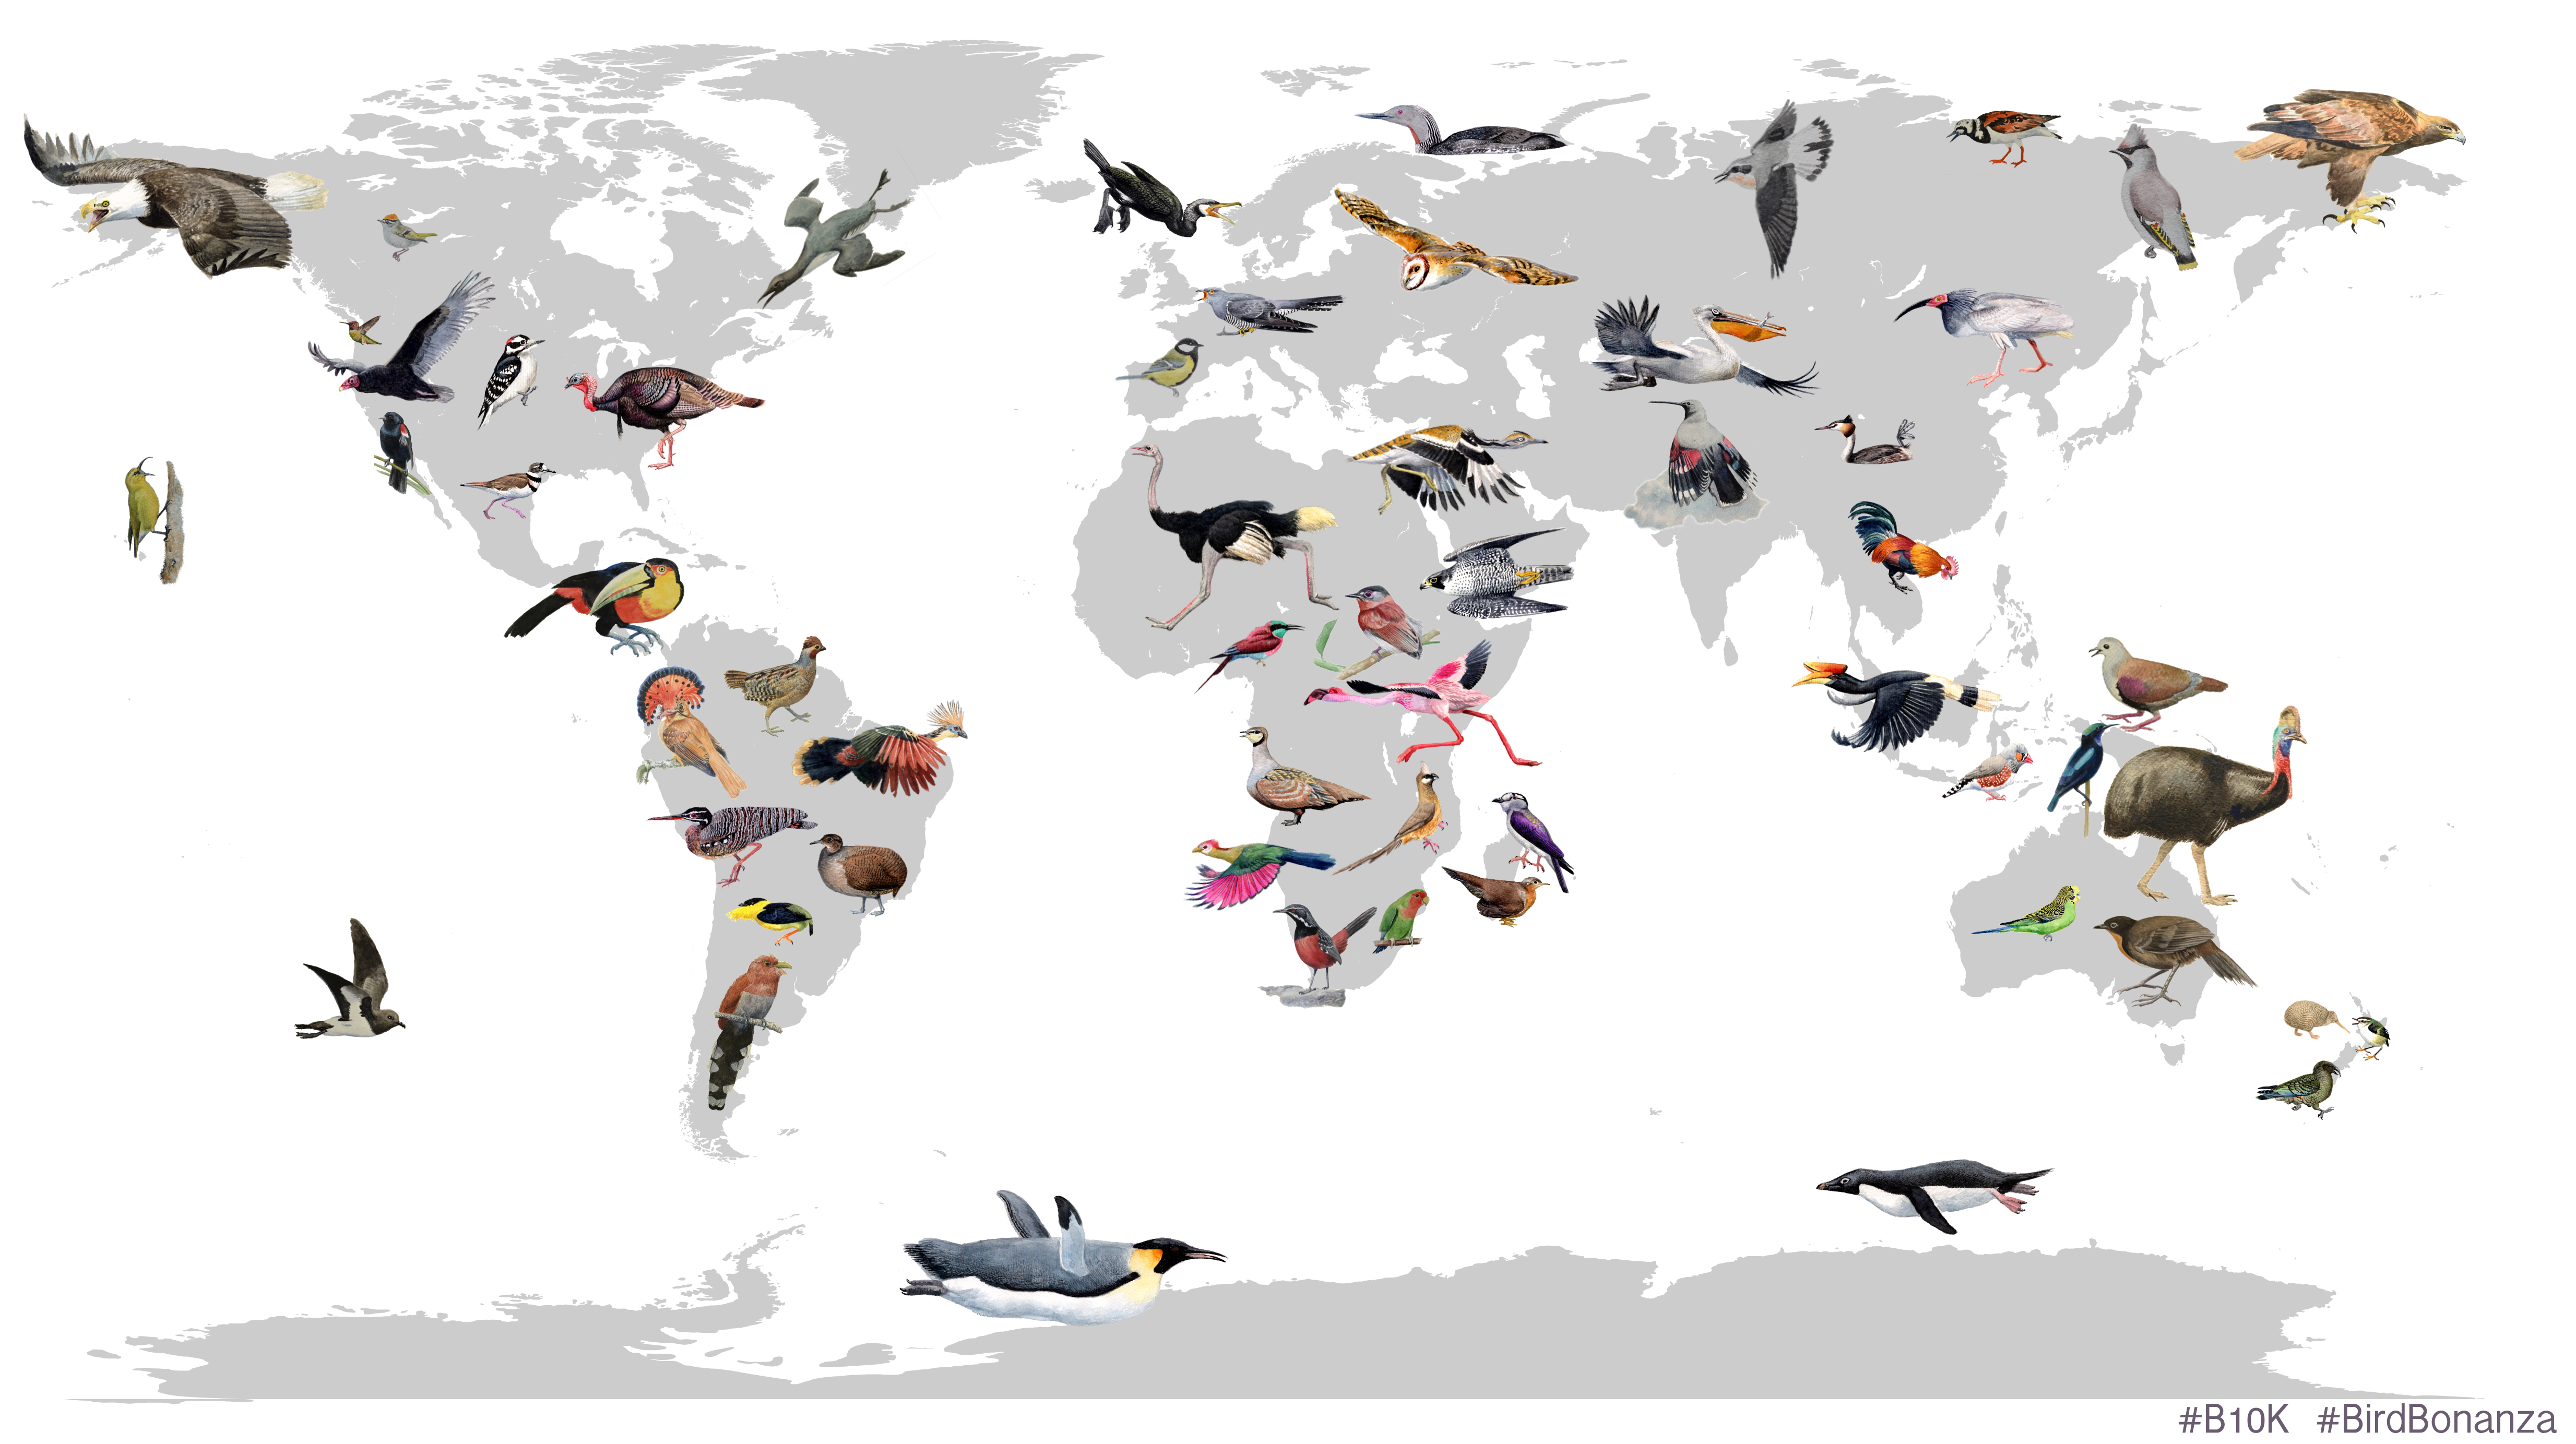 Collage of birds emerging in different parts of the world, by Josefin Stiller